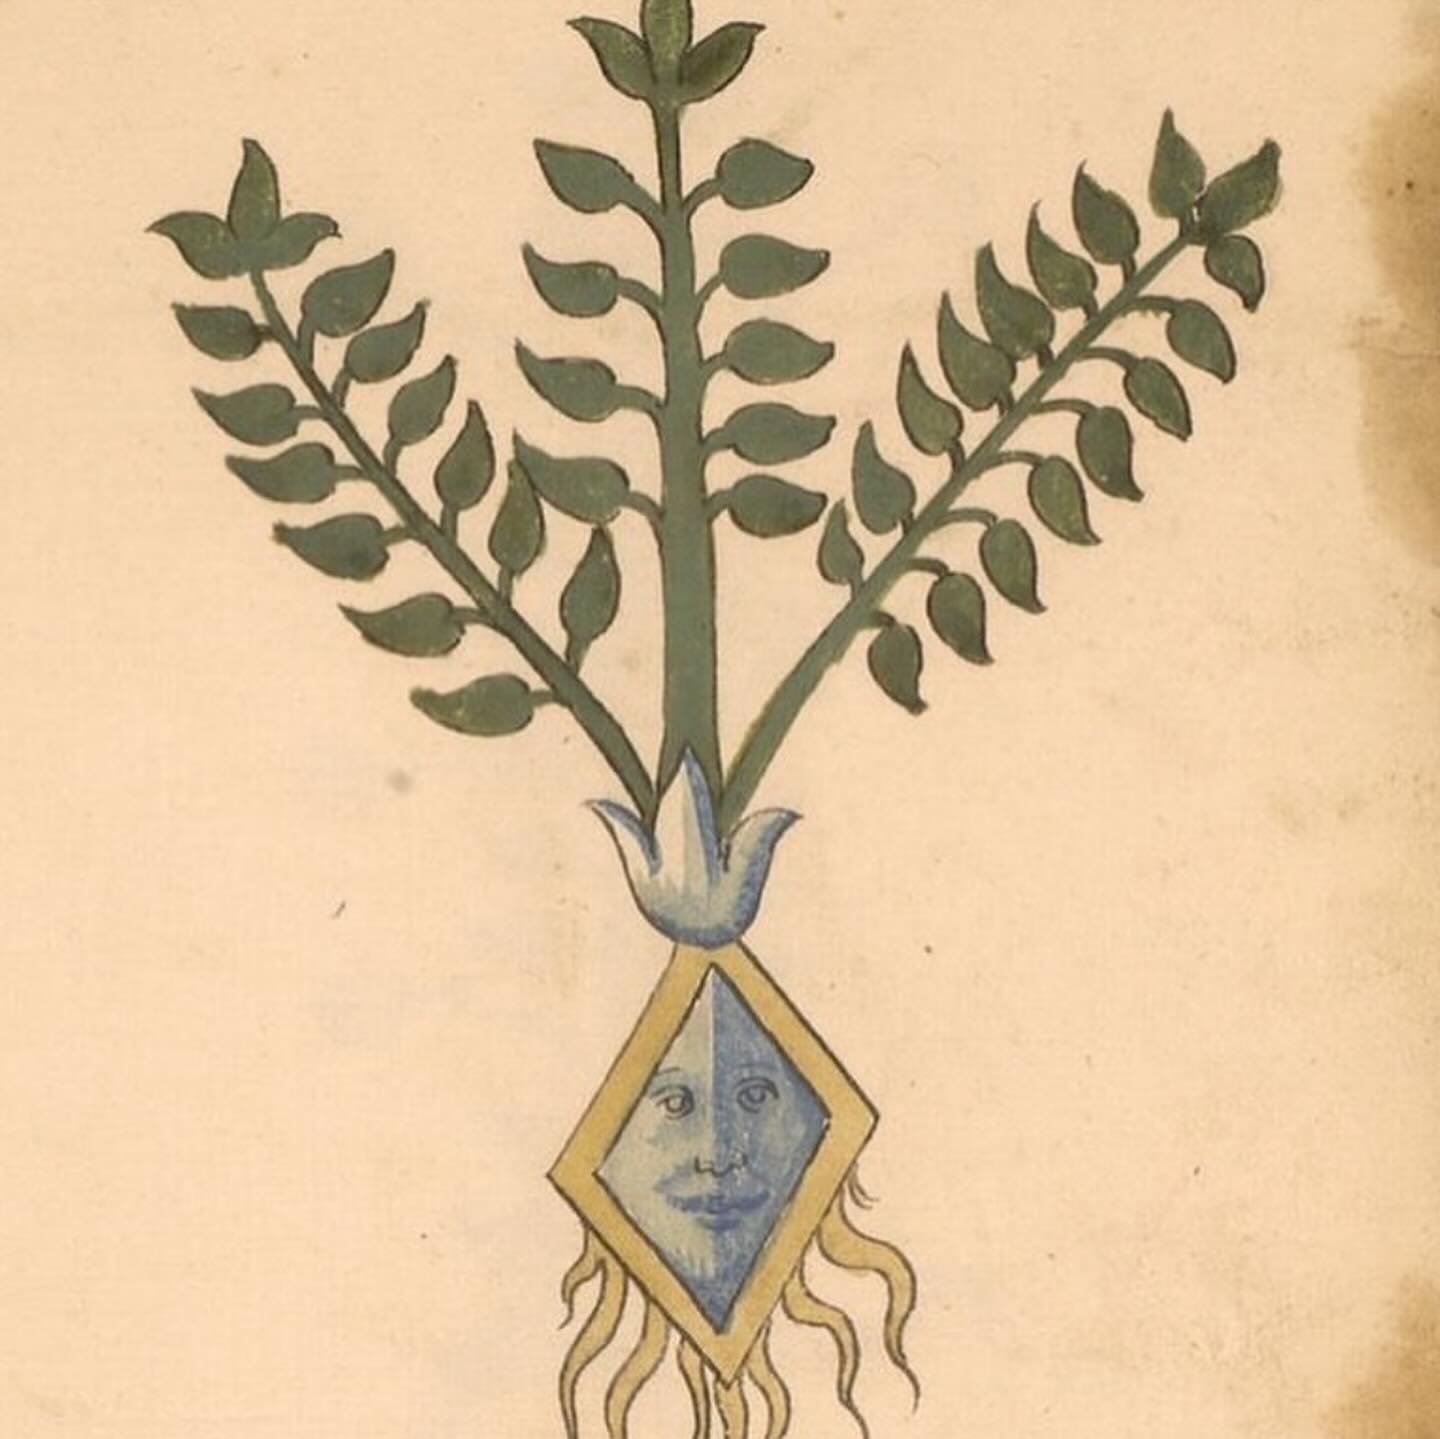 A herbal from northern Italy, most likely the Veneto, painted in the 15th century. In exploring the fascinating world of plants, the author imagined roots with anthropomorphised or dragon- like faces 🐉🌱🤣
What&rsquo;s your favourite image? 

#histo